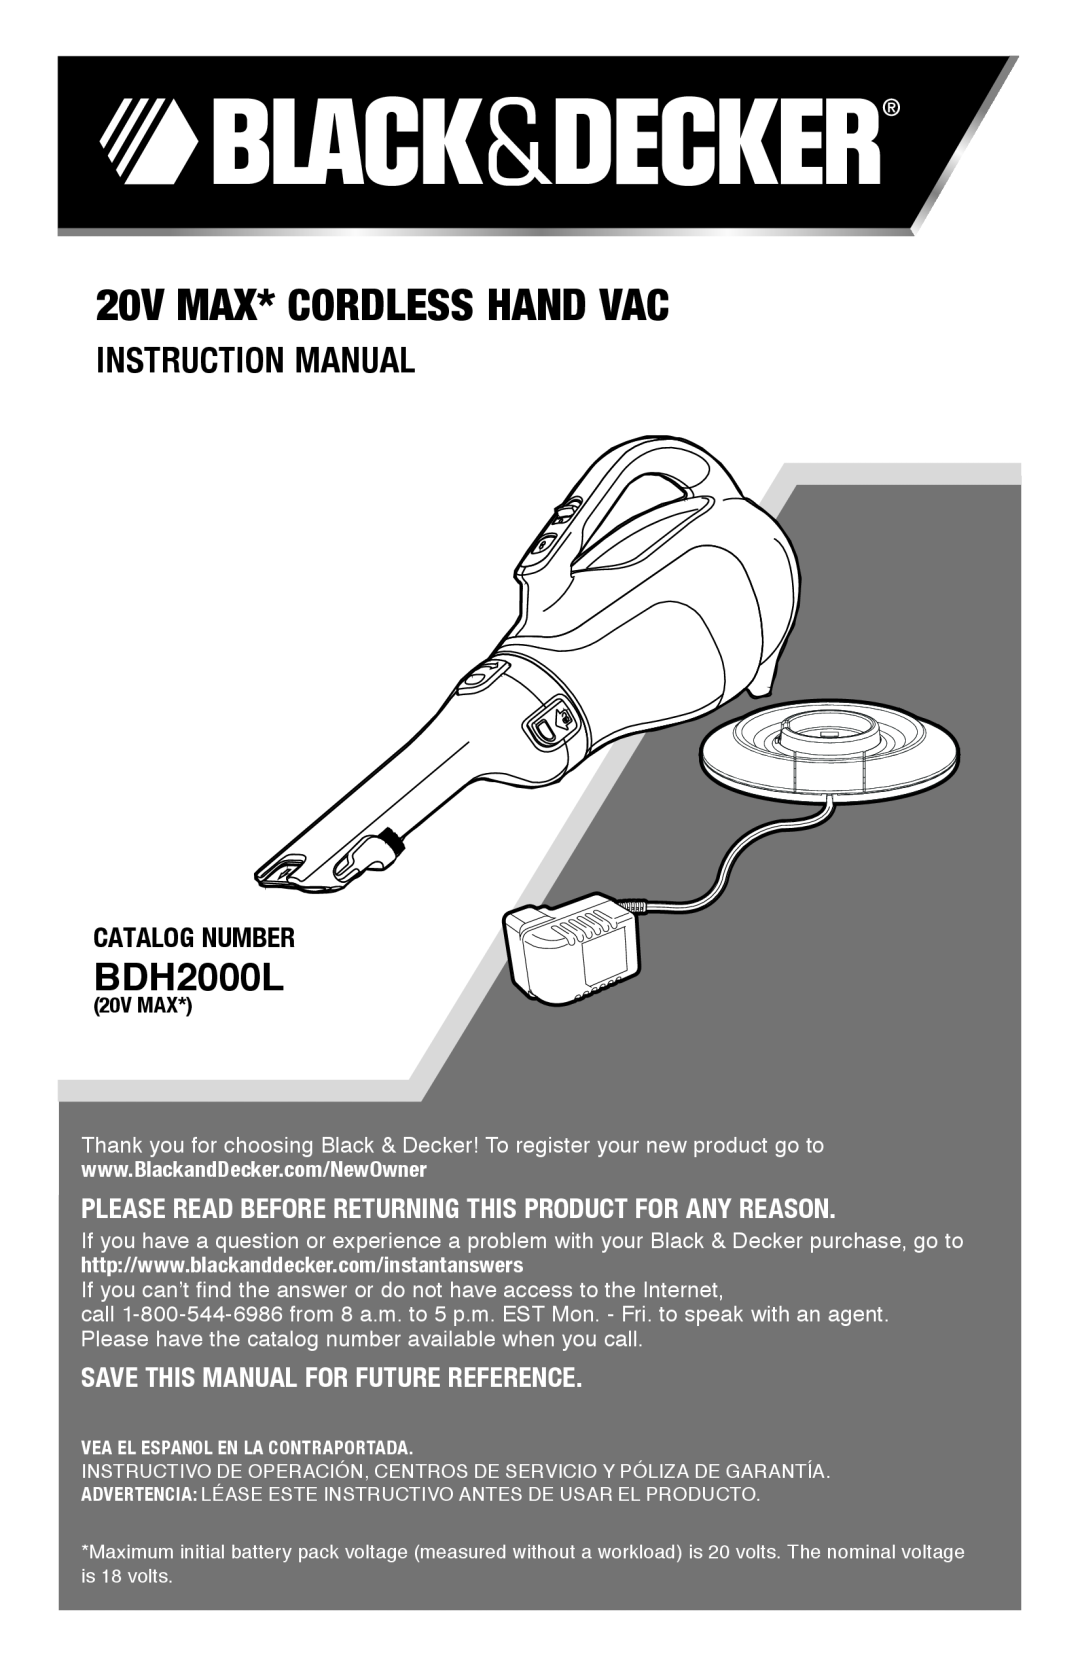 Black & Decker BDH2000L instruction manual Instruction Manual, Catalog Number, Save this manual for future reference 